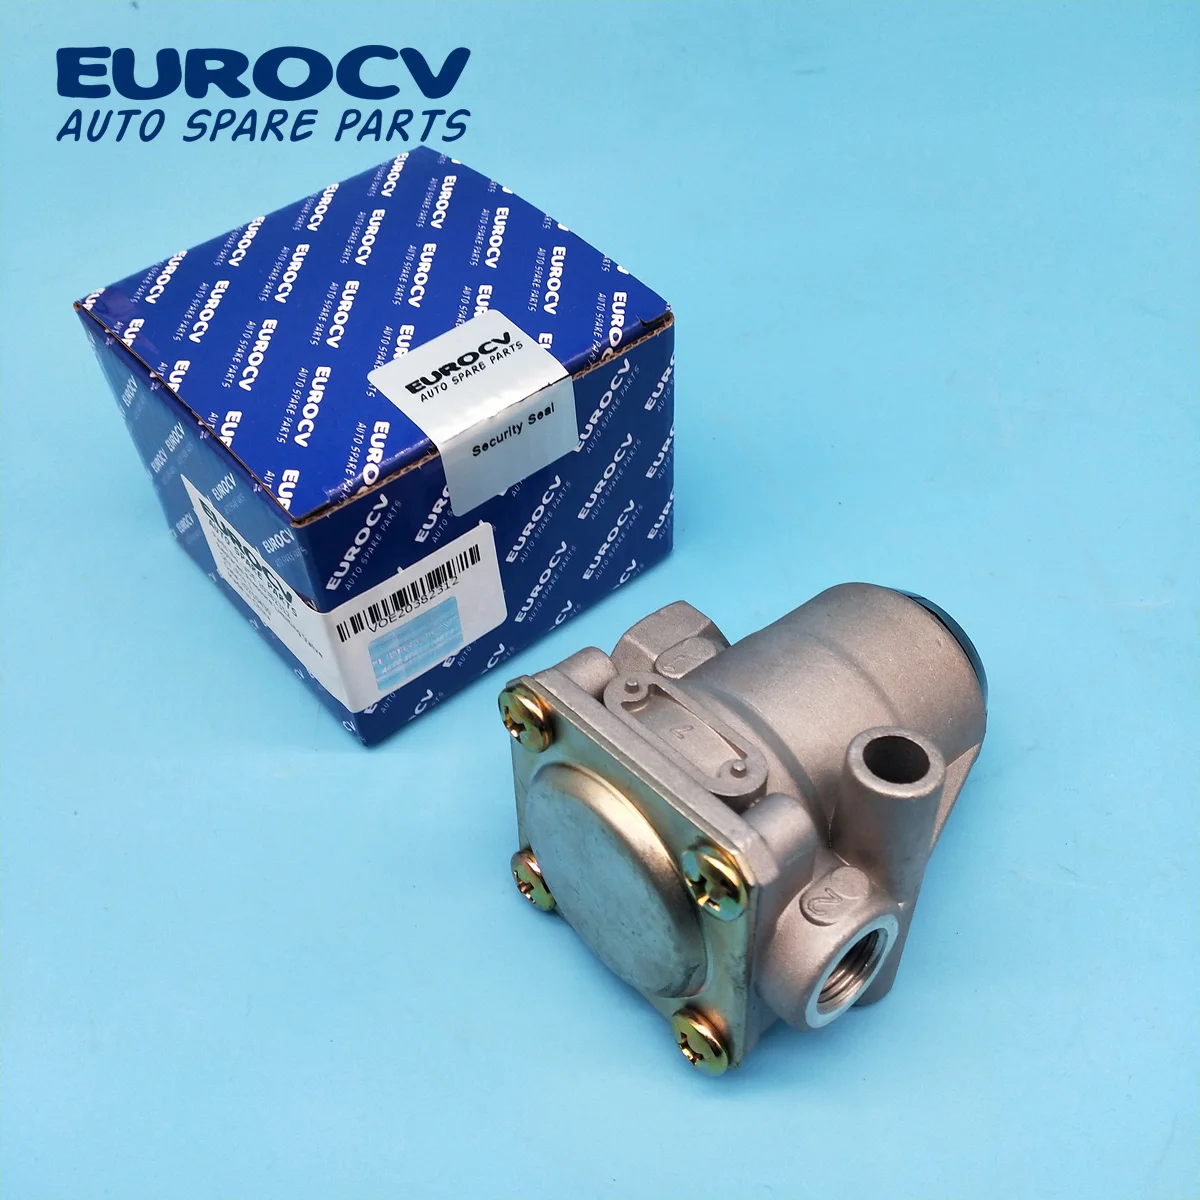 Spare Parts for Volvo Trucks VOE 20382312 Pressure Limiting Valve 4750150630 images - 6